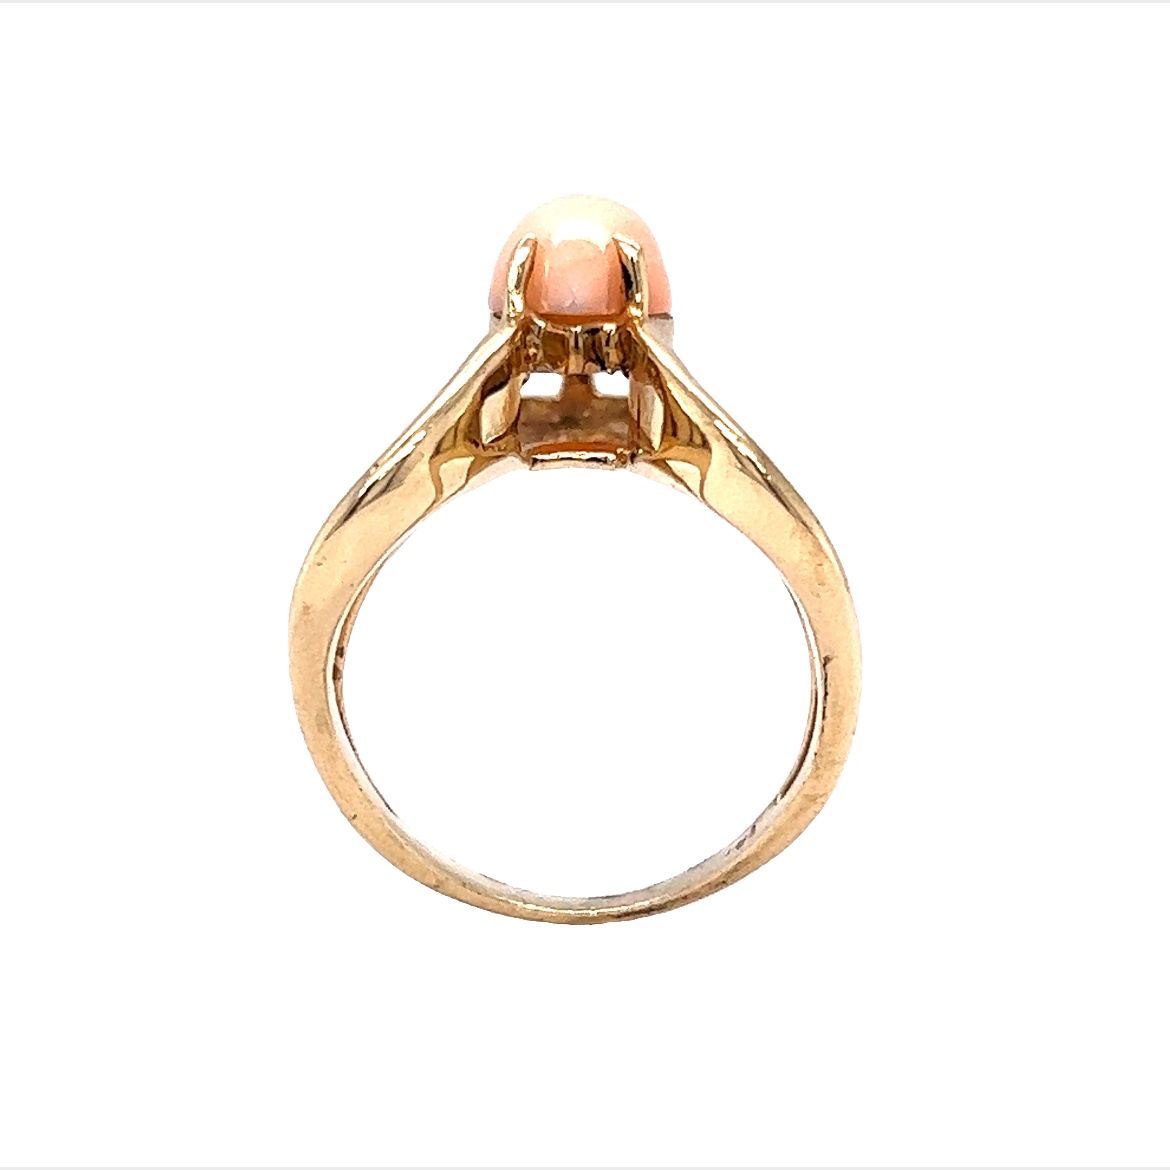 Vintage 1960's Marquis Coral Ring in 14K Yellow Gold